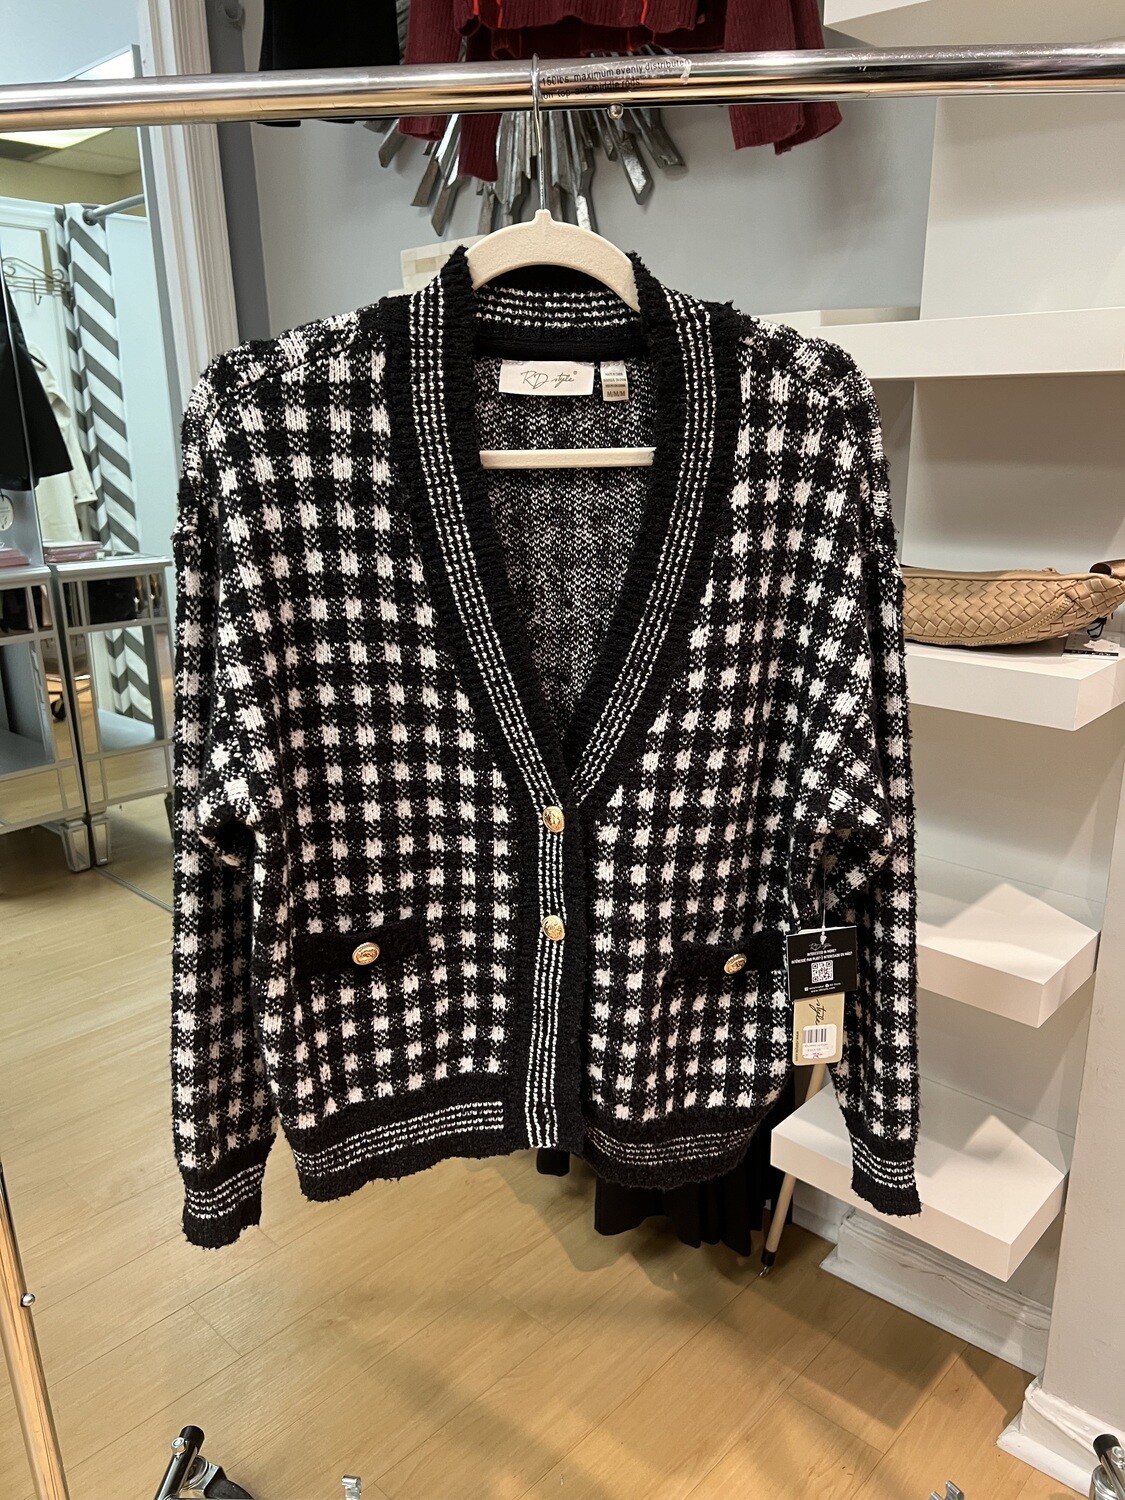 RD Blk/whte cardigan